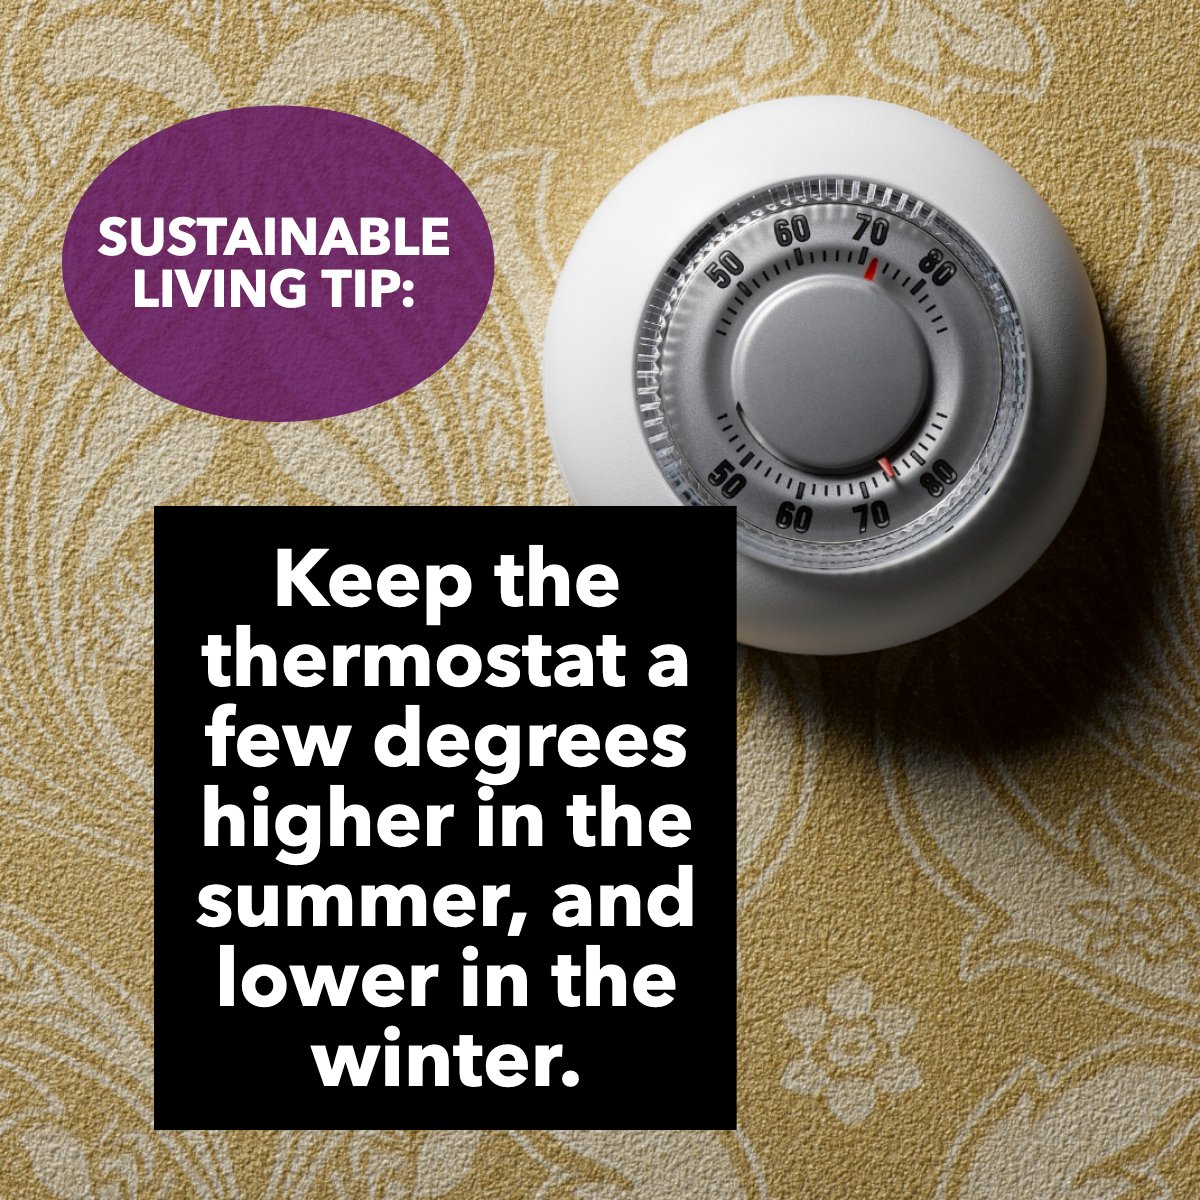 Here is a useful tip! 

Let's try it this and every season! ❄️

#sustainablelifestyle #sustainable #sustainablity #thermostat
 #chadwickknight #realtor #realestate #floridarealtor #floridarealestate #mvprealty #realestateadvisor #homesforsale #property #forsale